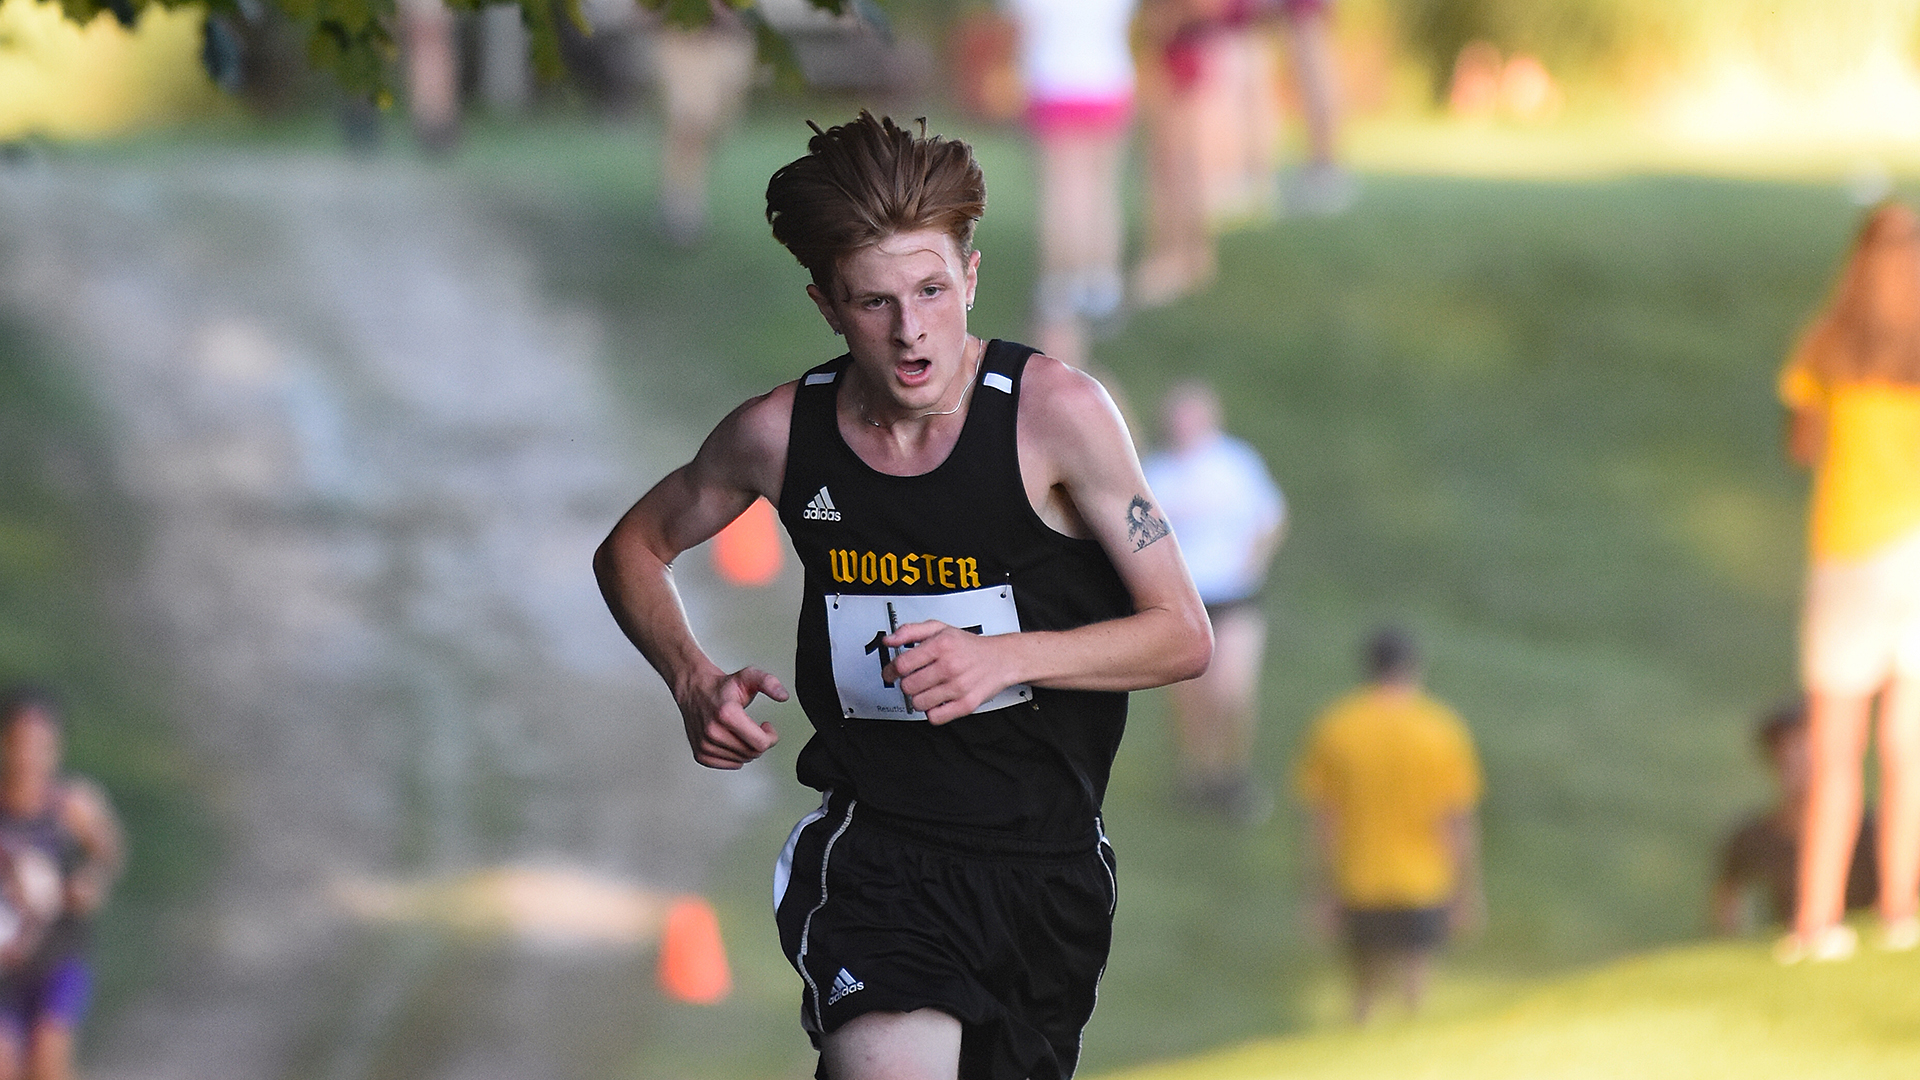 Will Callender, Wooster cross country